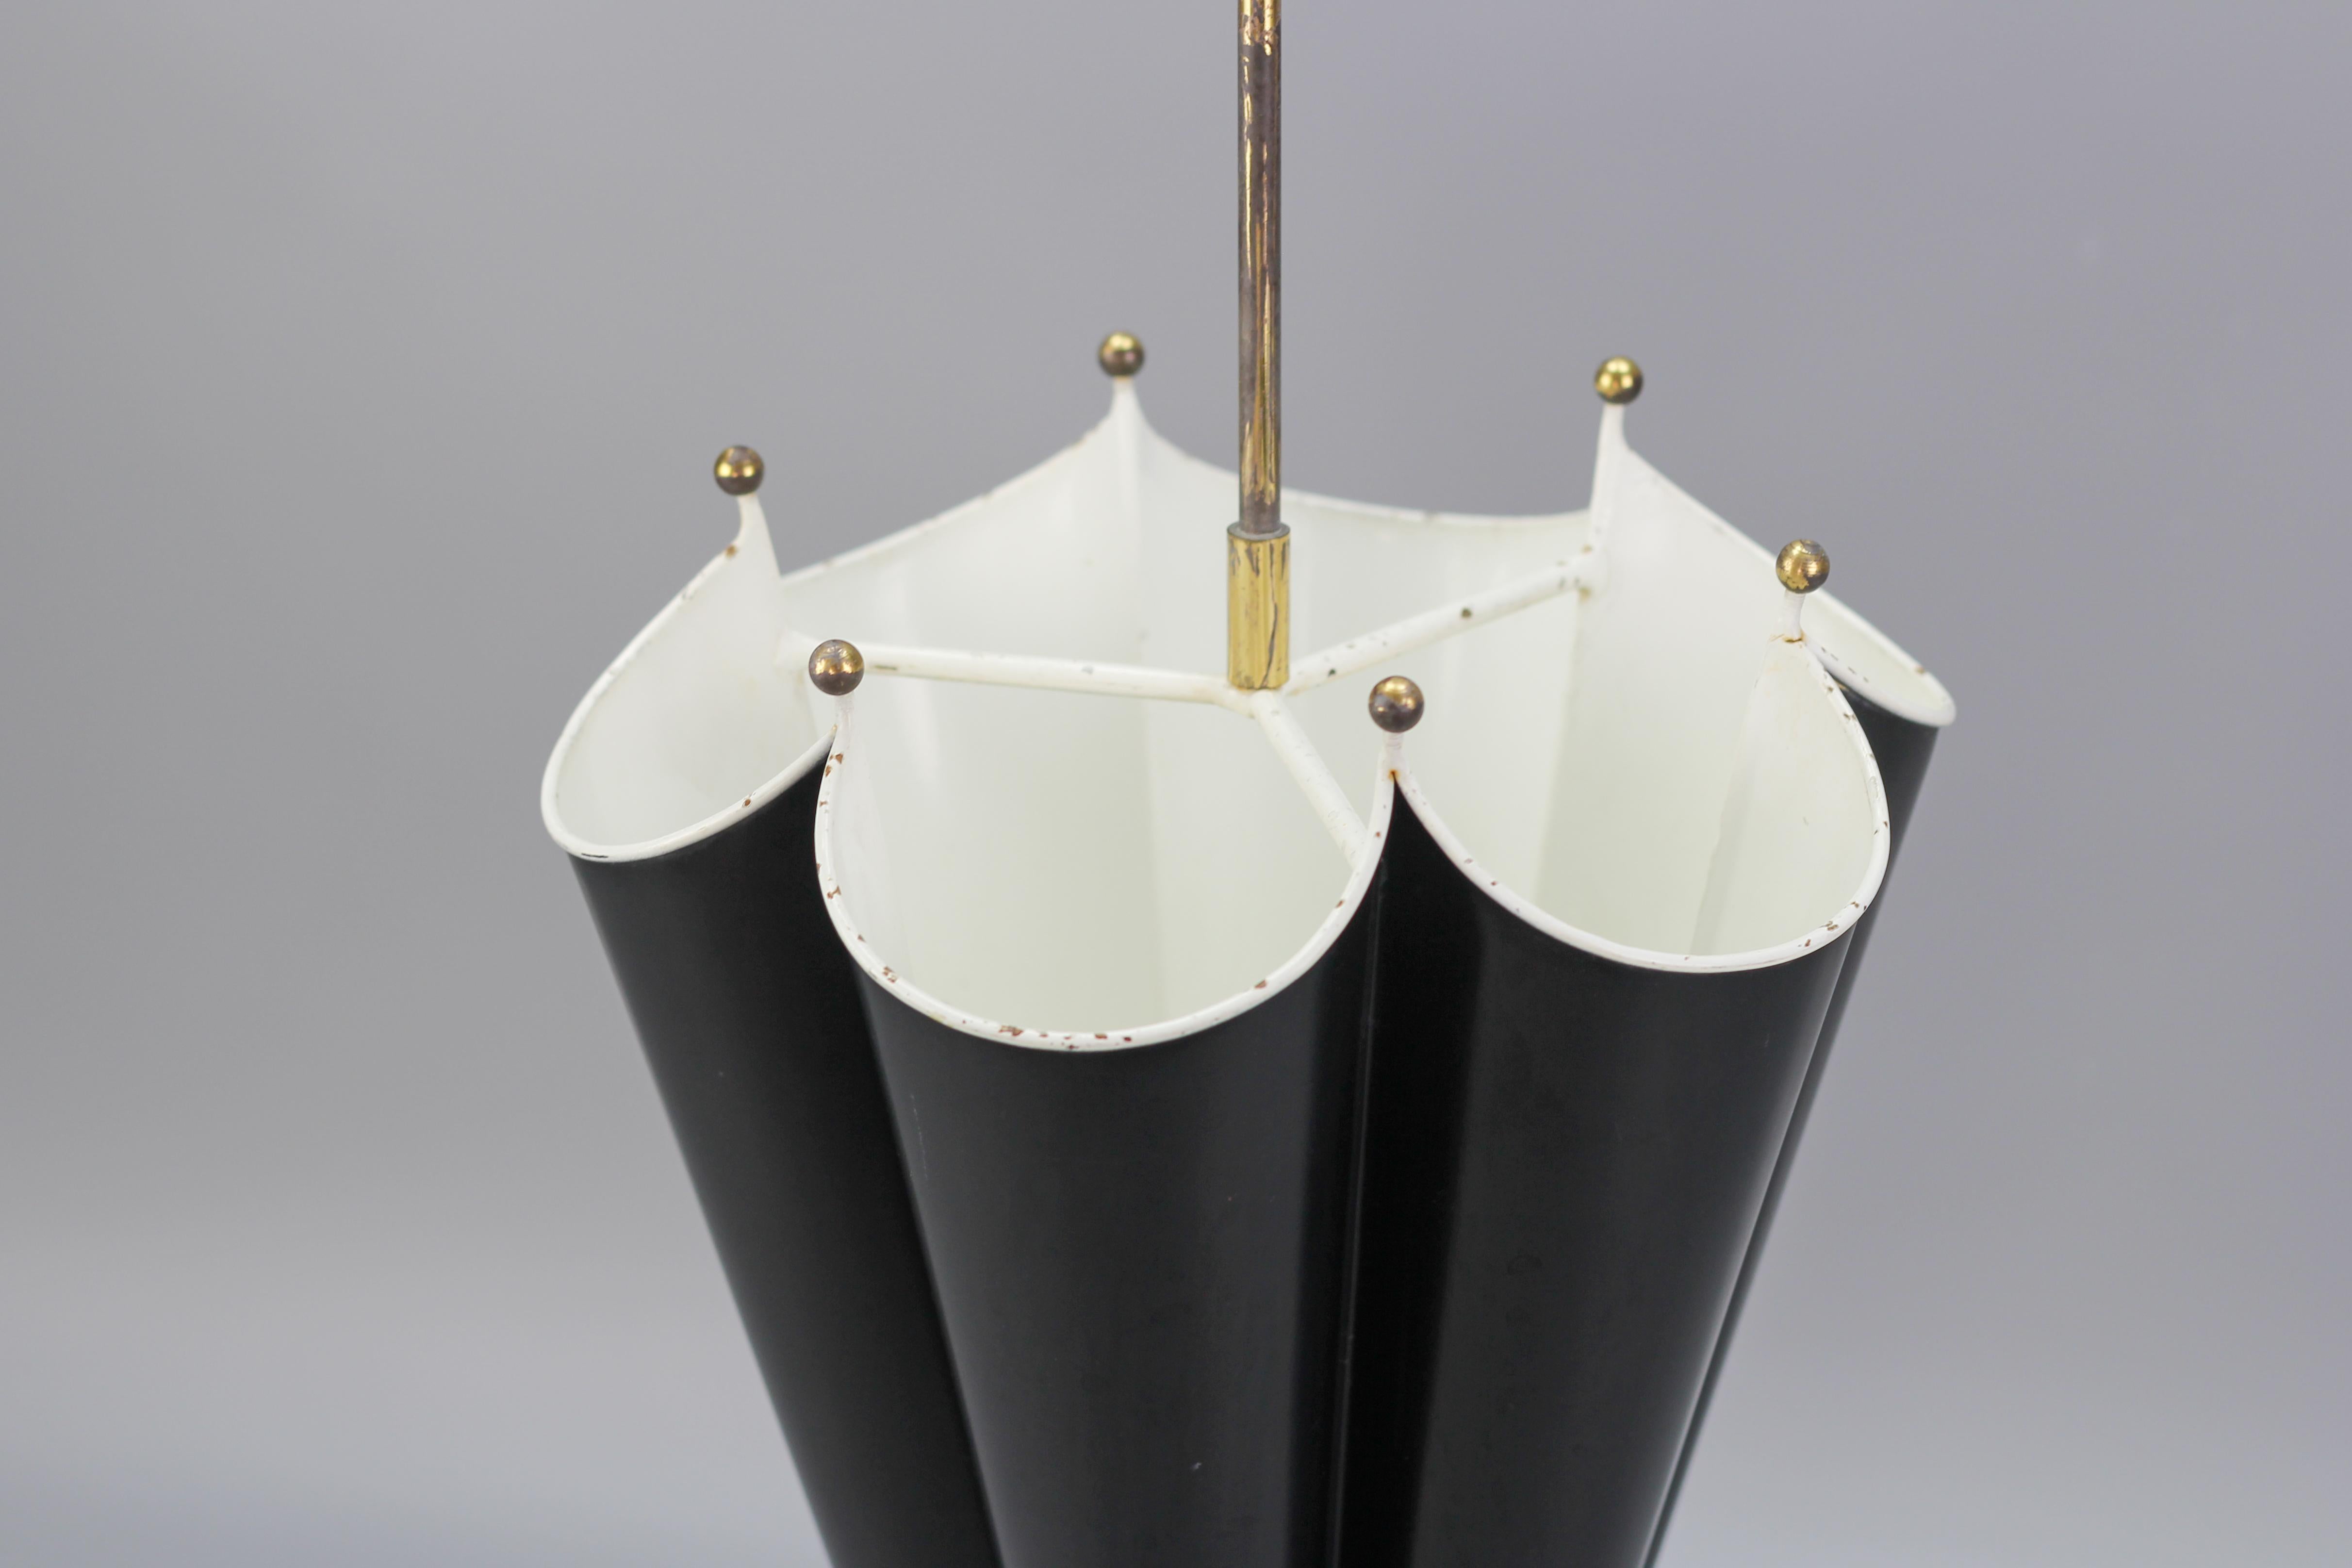 Mid-20th Century French Umbrella-Shaped Black and White Metal and Brass Umbrella Stand For Sale